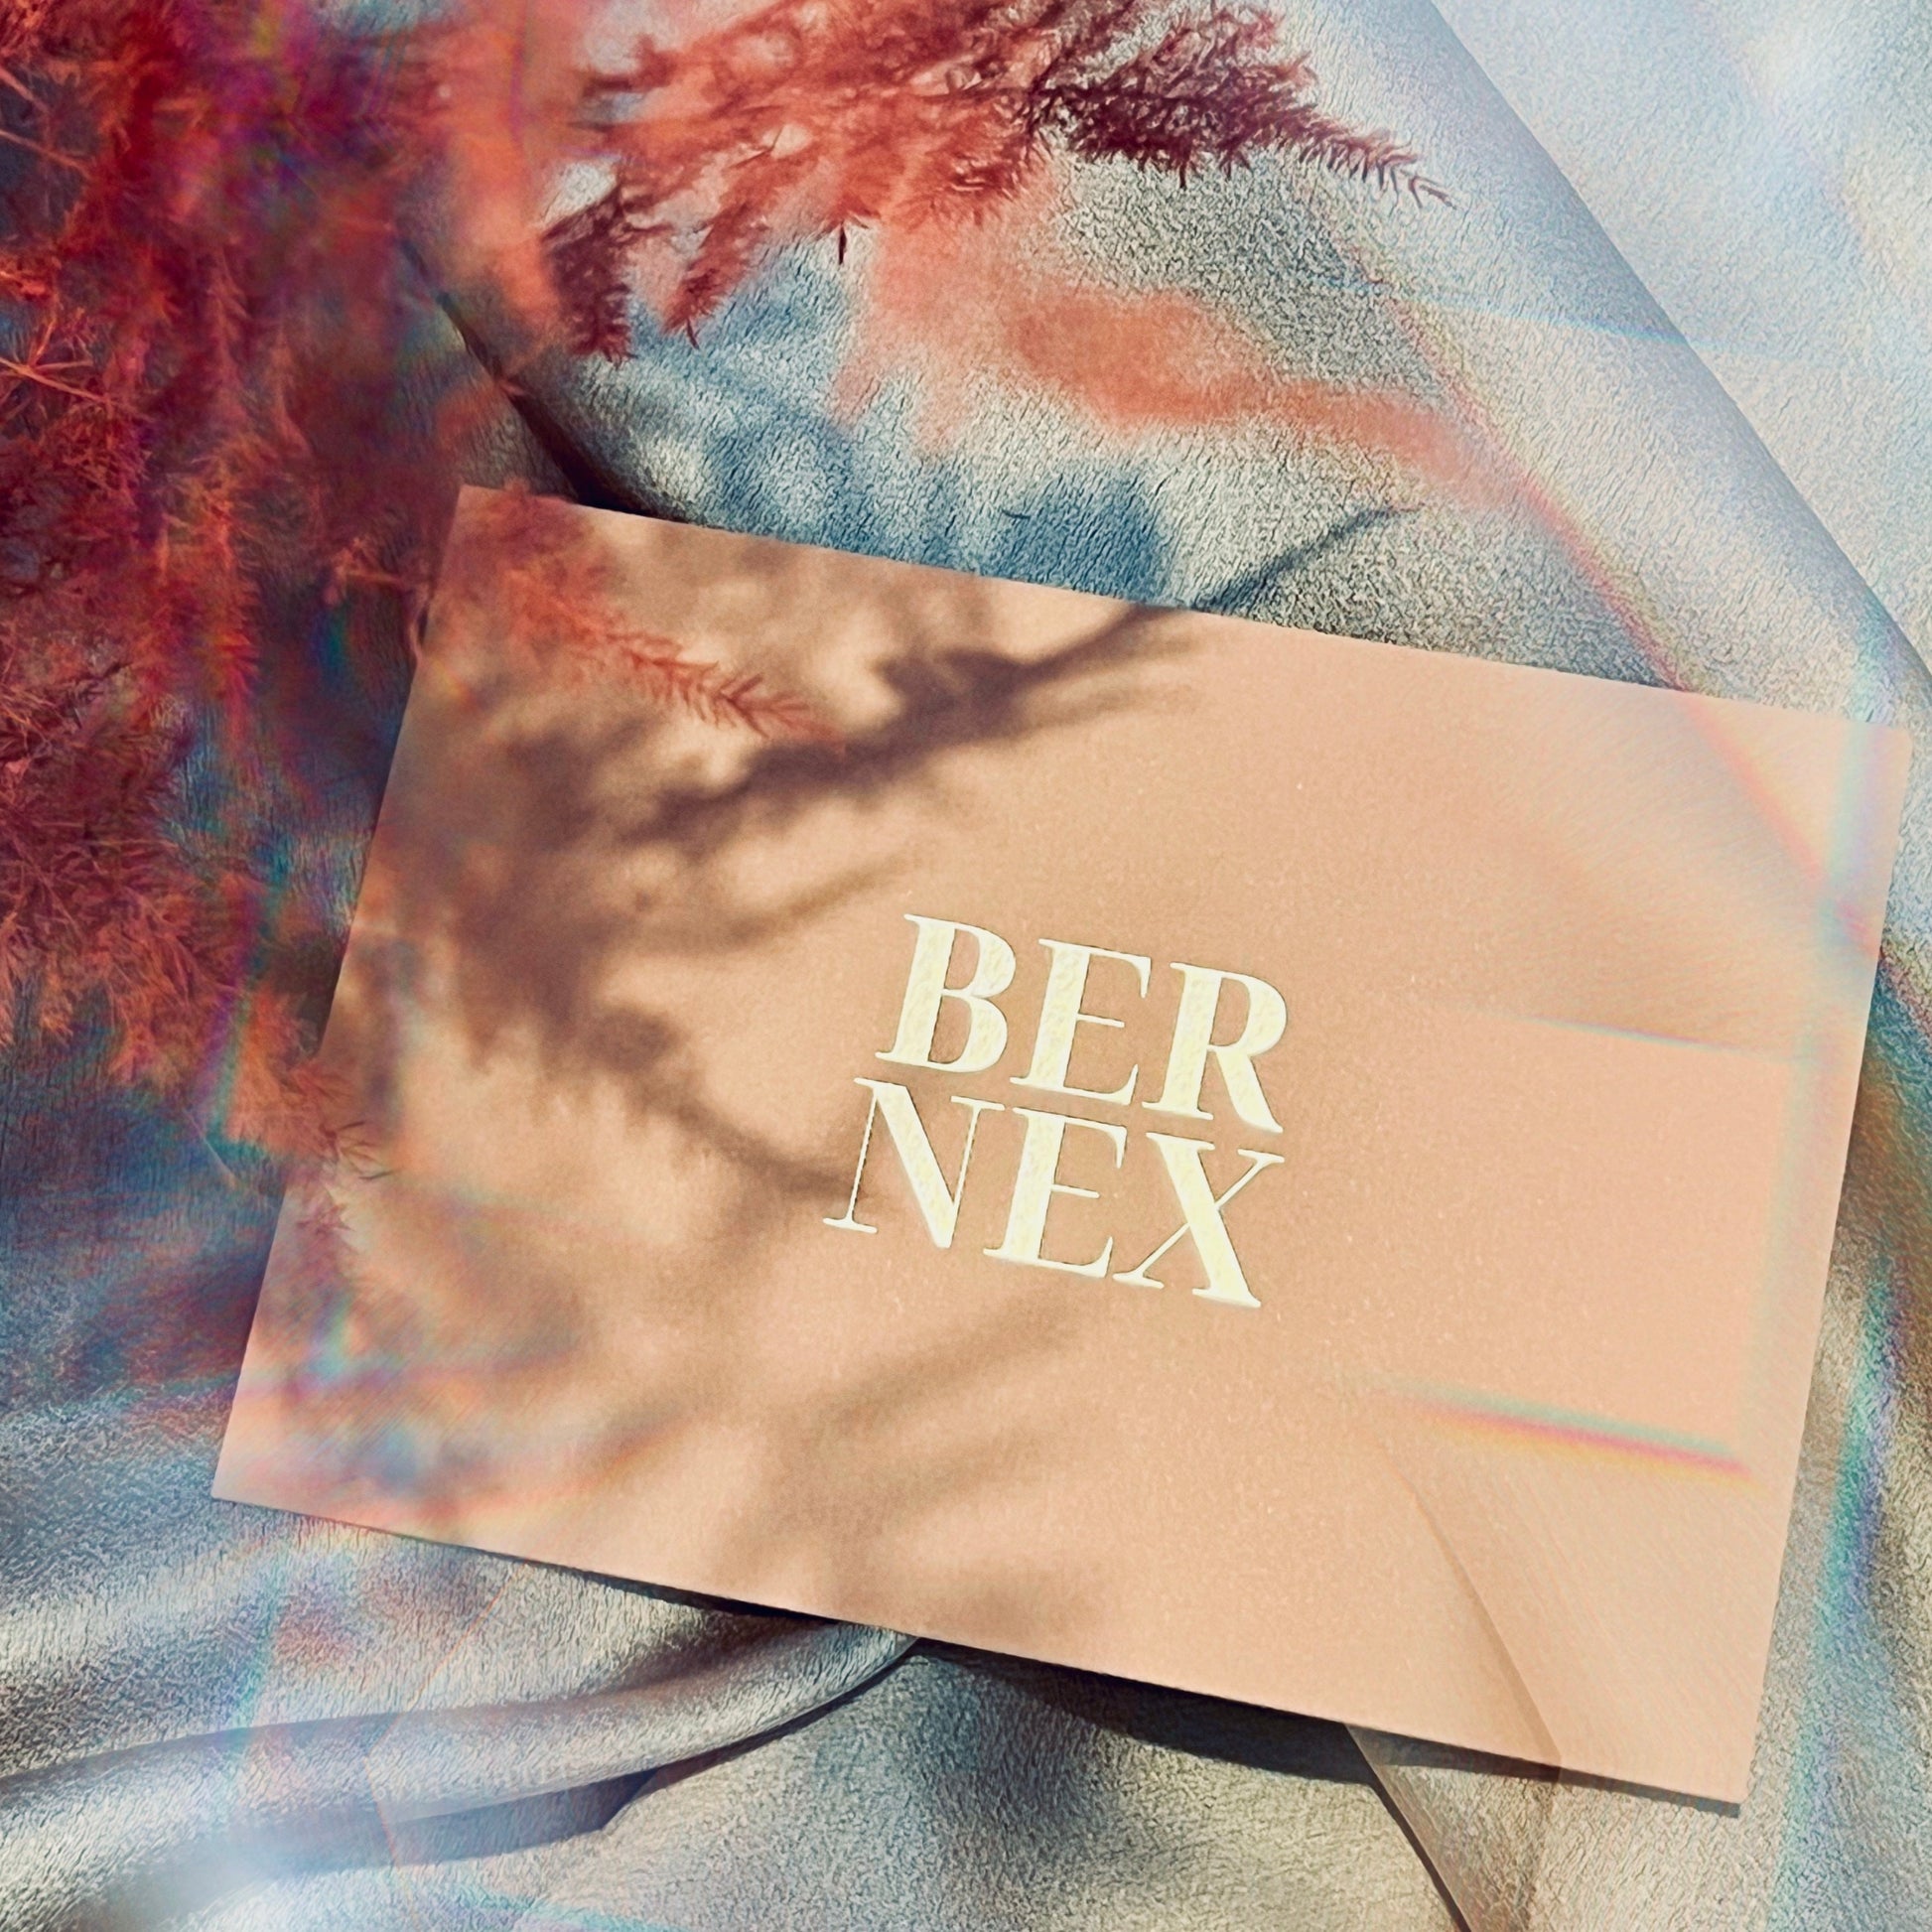 The Gift Card - House Of Bernex